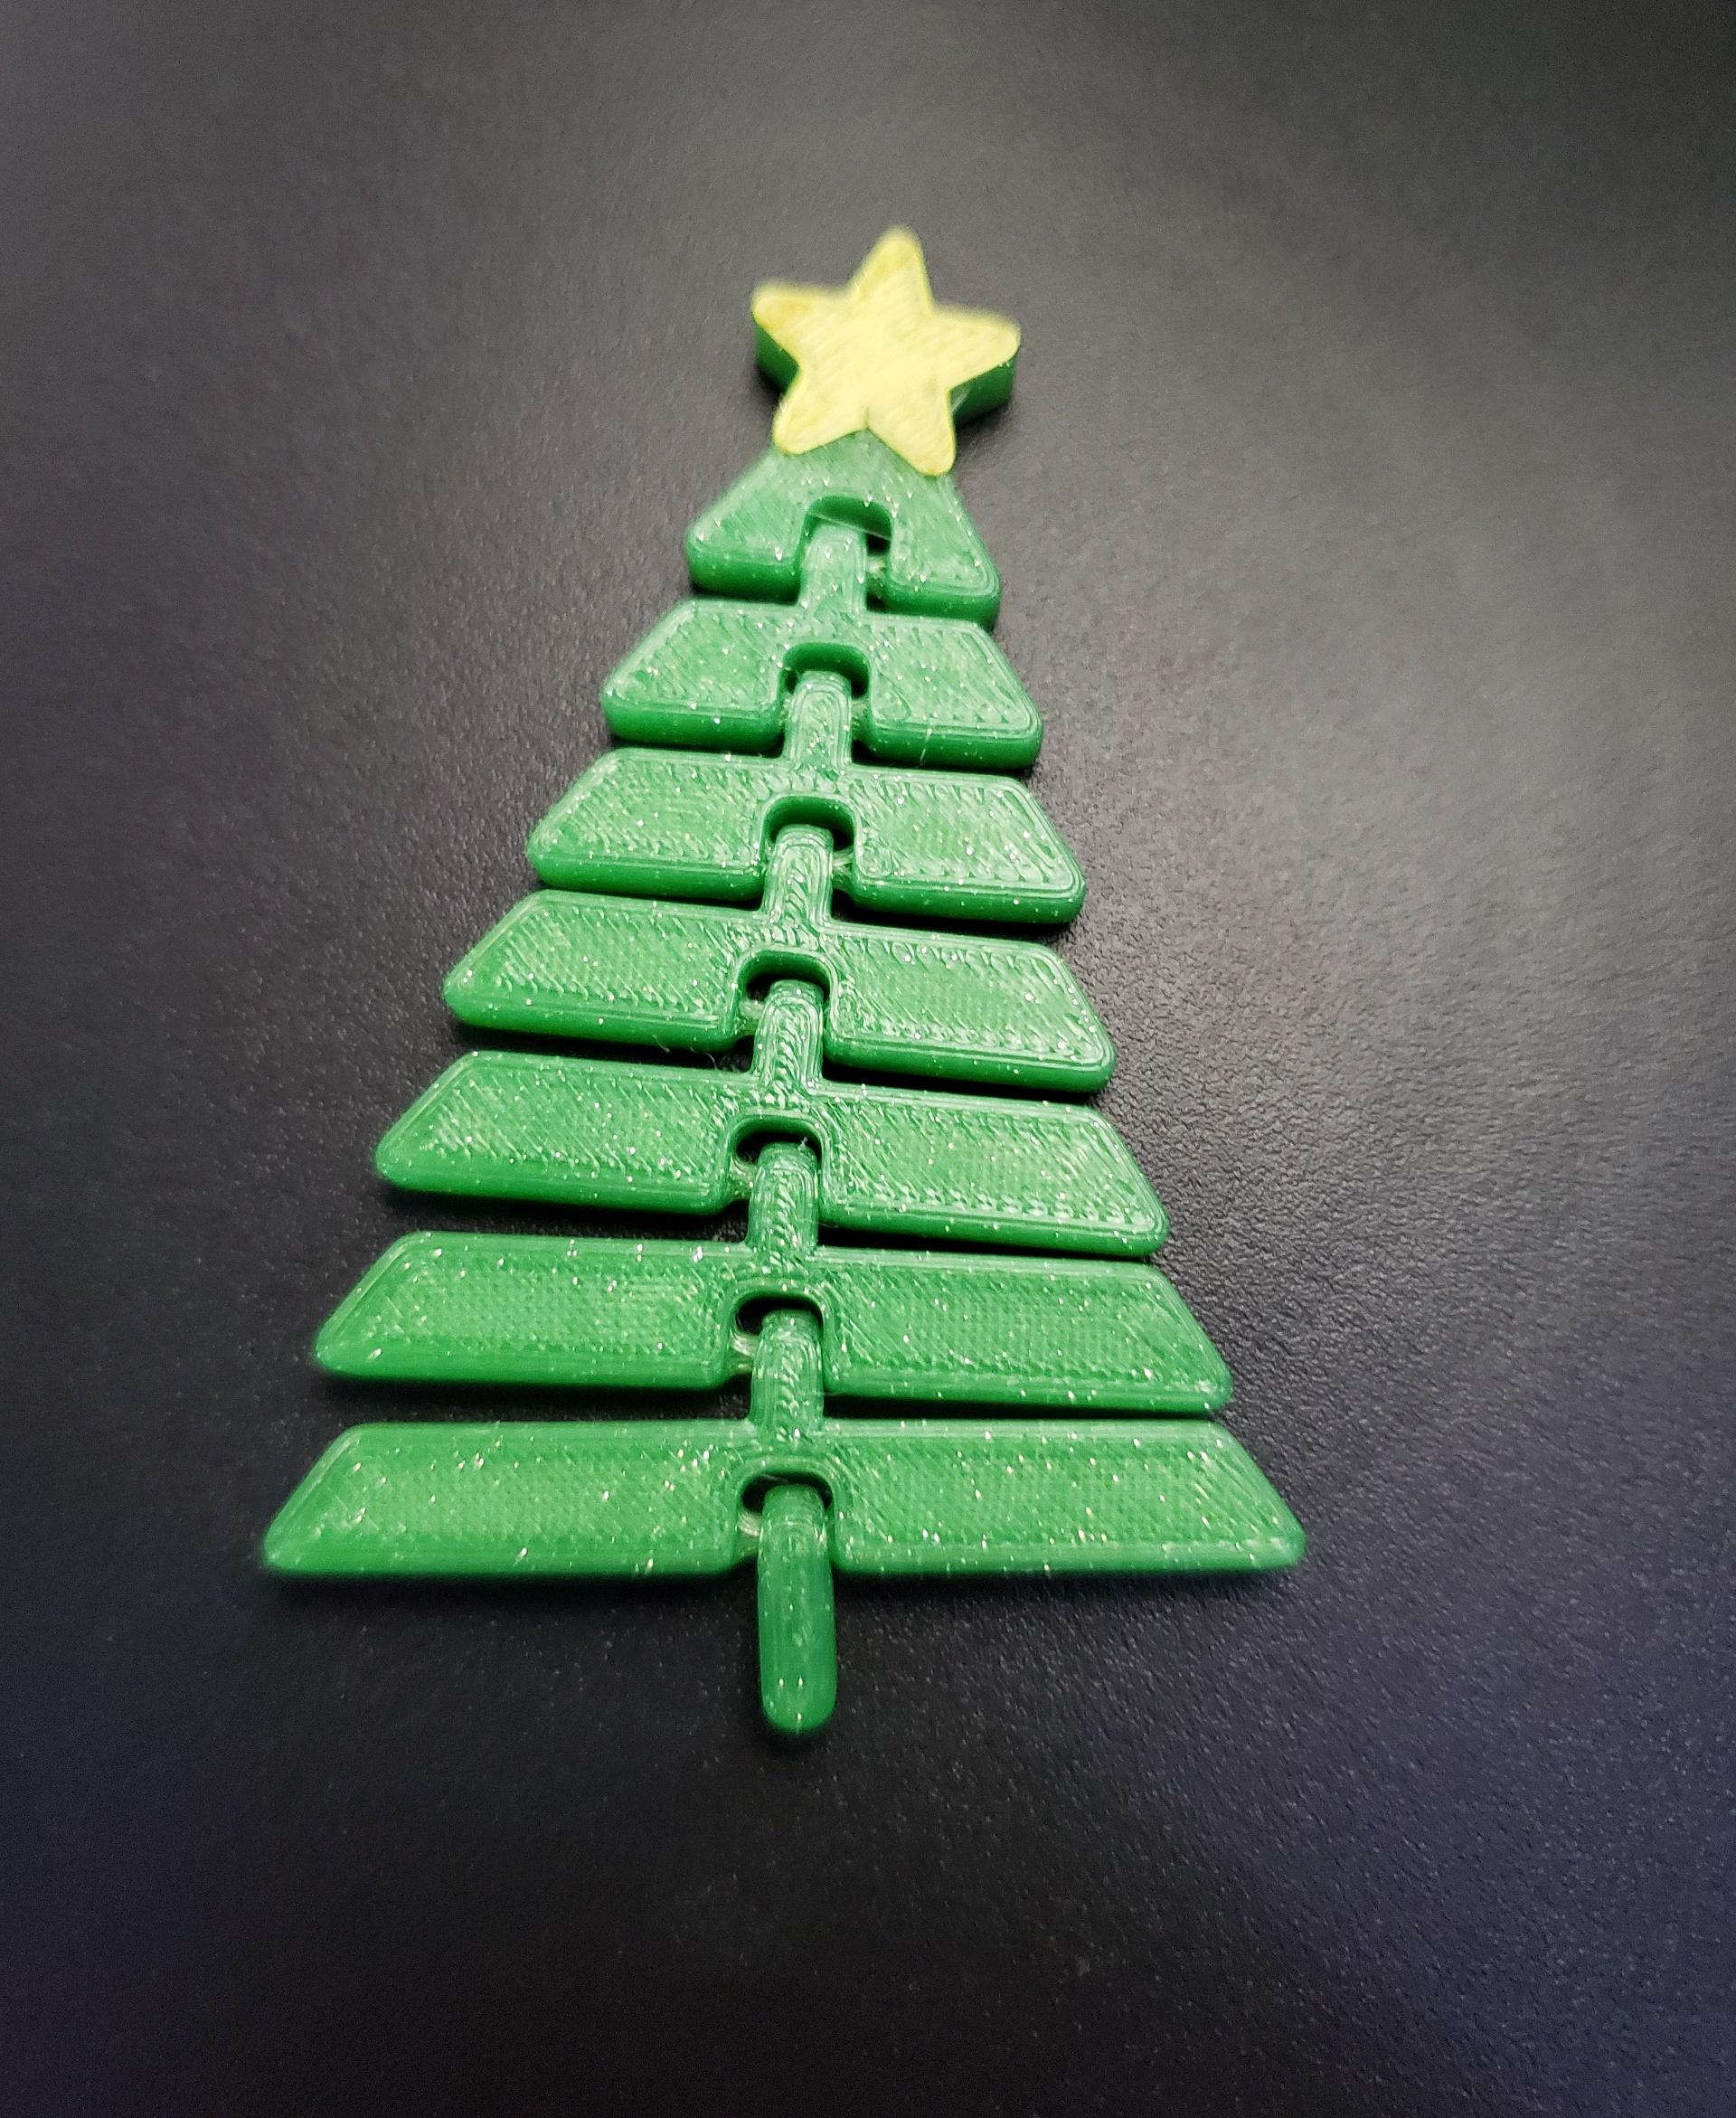 Articulated Christmas Tree with Star - Print in place fidget toy - 3mf - protopasta fleck n forest green - 3d model